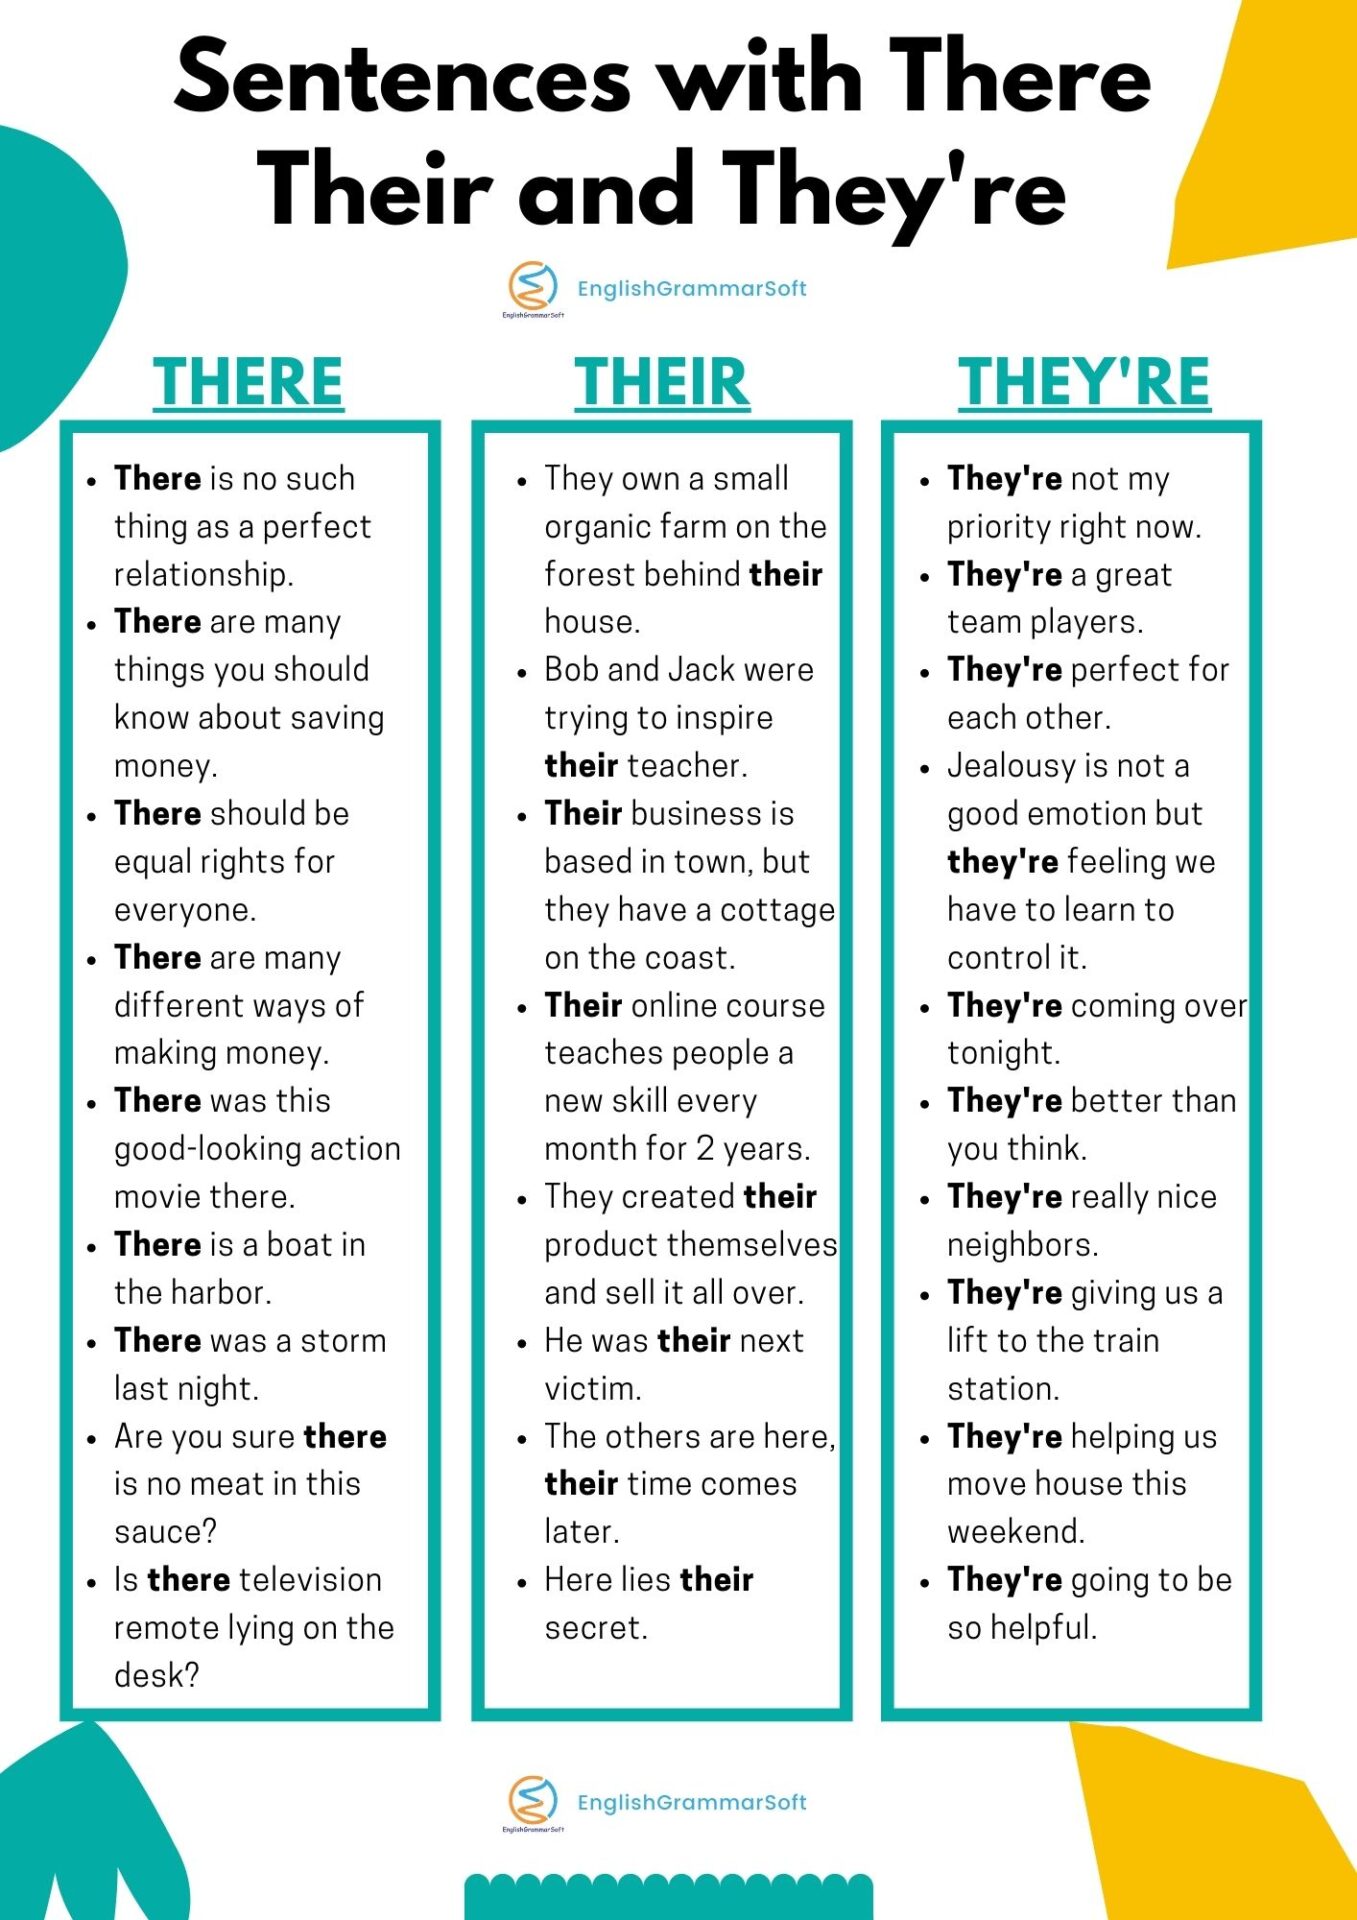 Sentences with There Their and They're